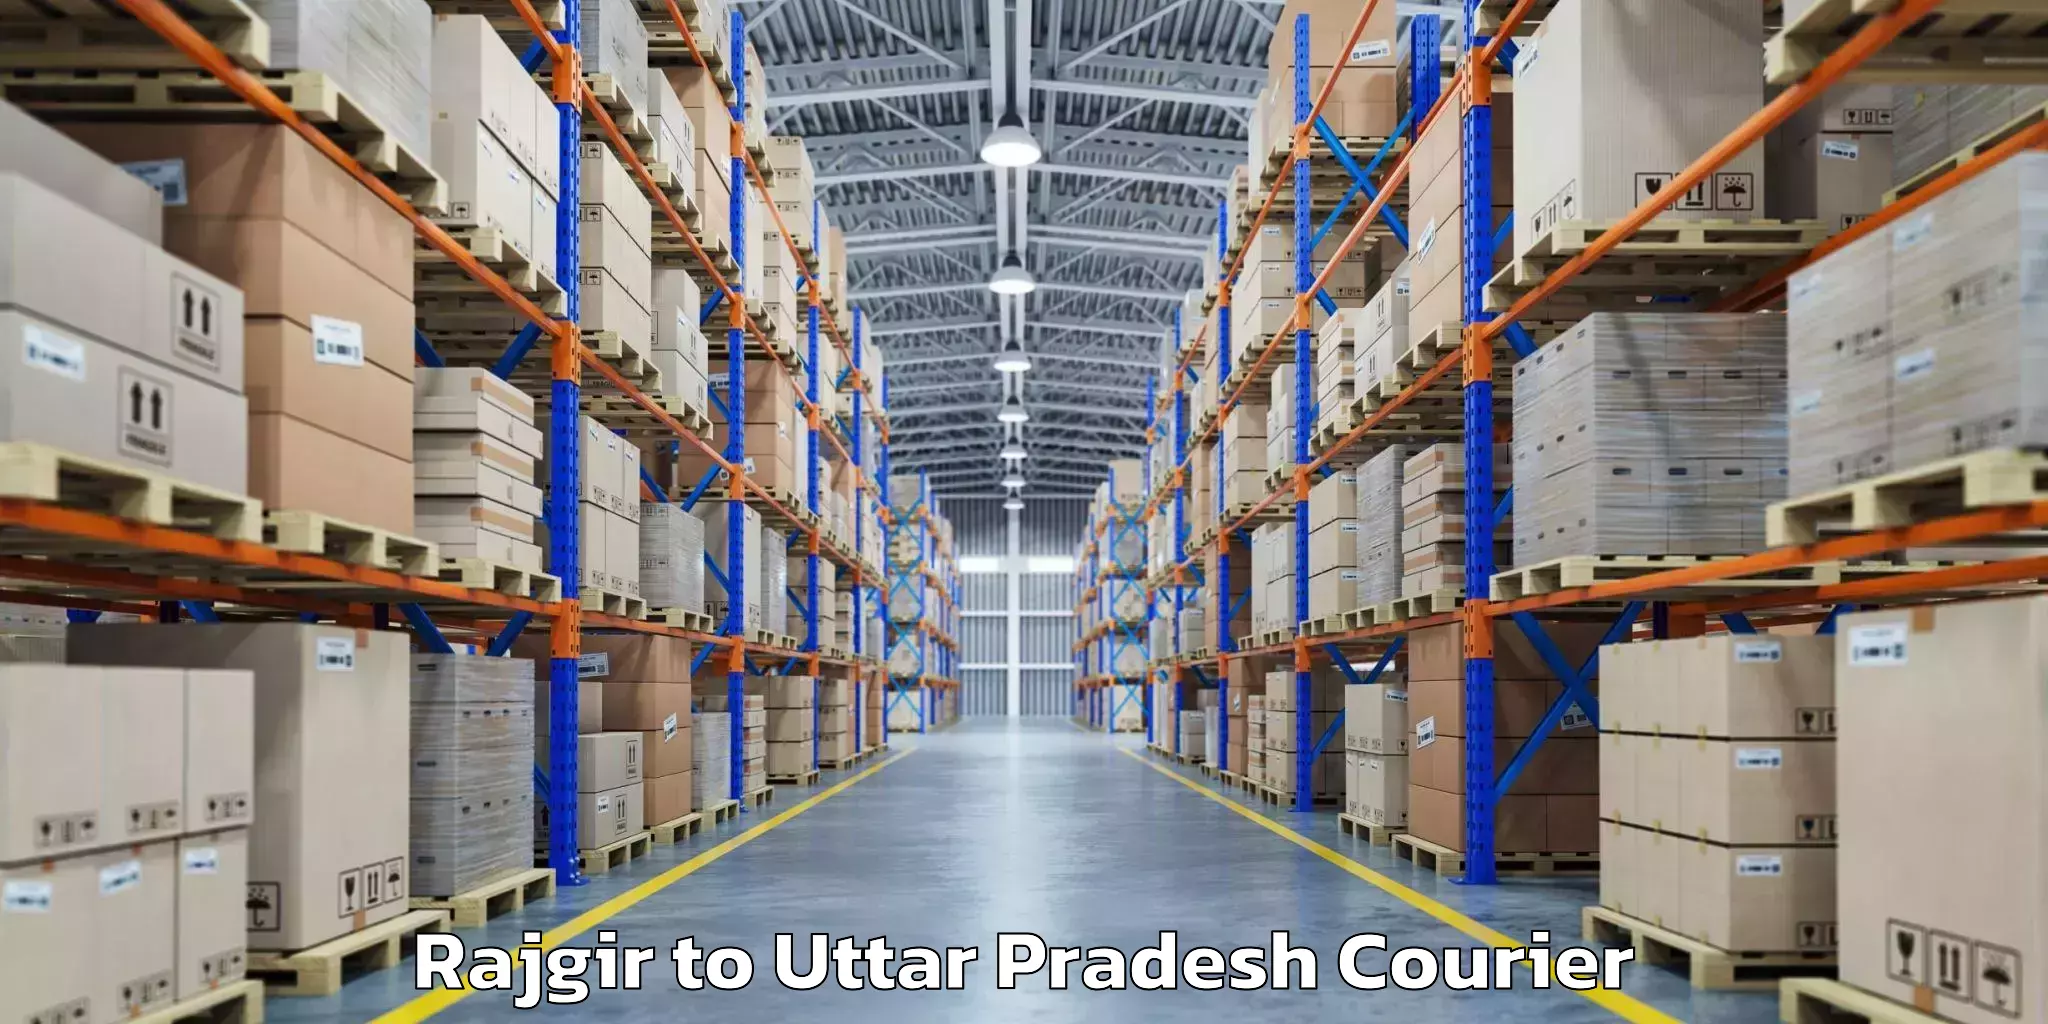 Luggage delivery logistics in Rajgir to Soraon